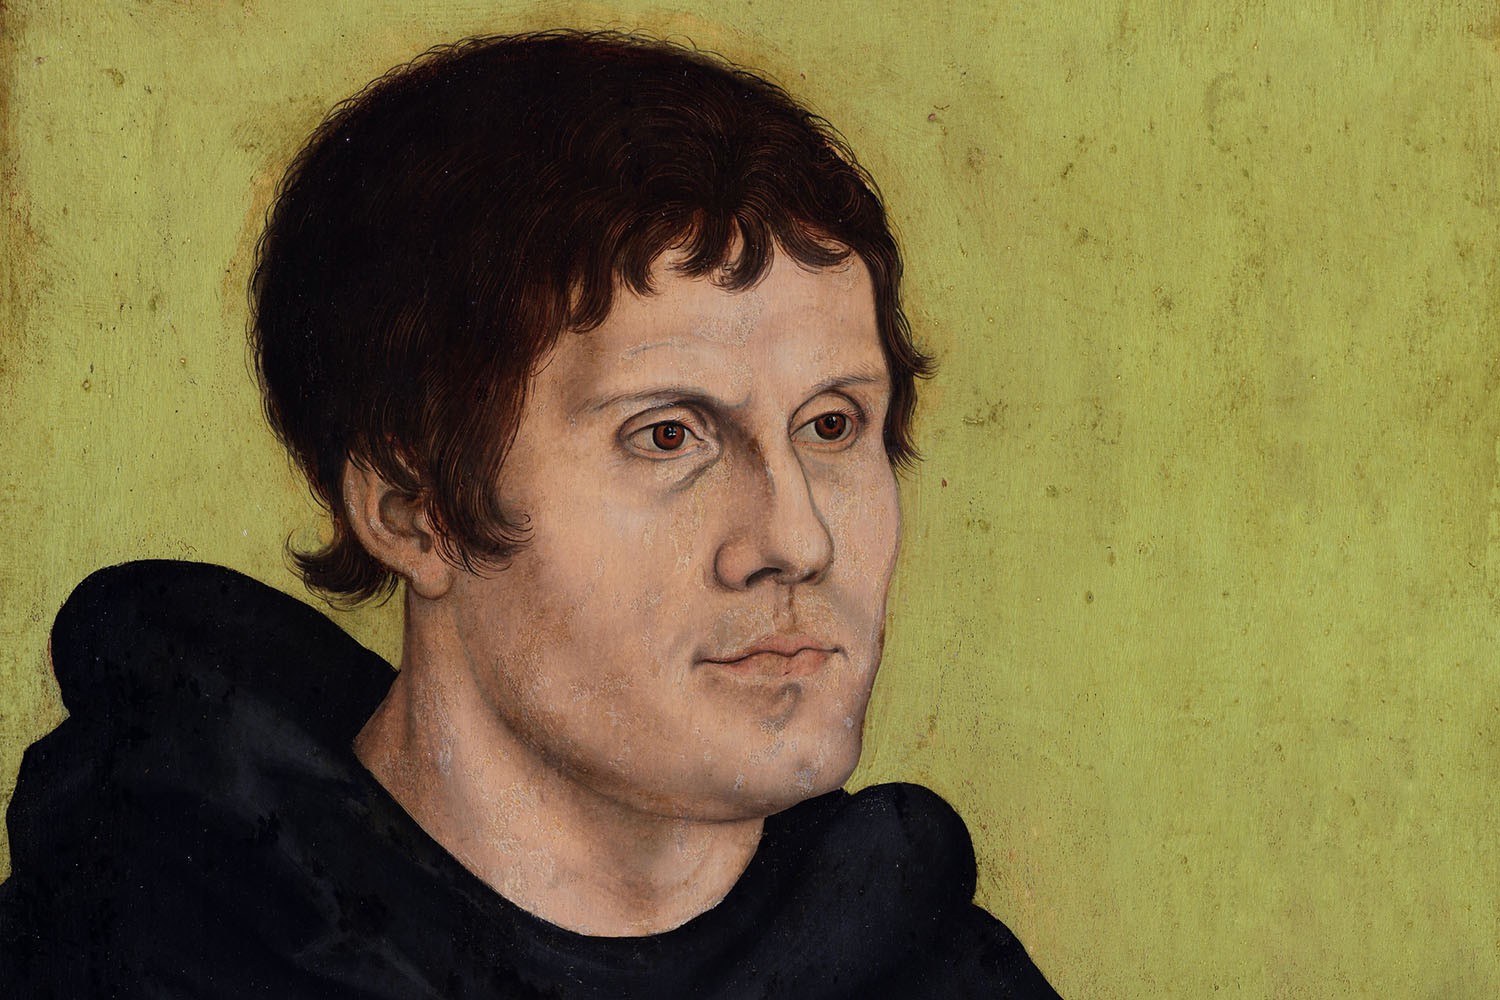 Martin Luther as an Augustinian Monk, by workshop of Lucas Cranach the Elder